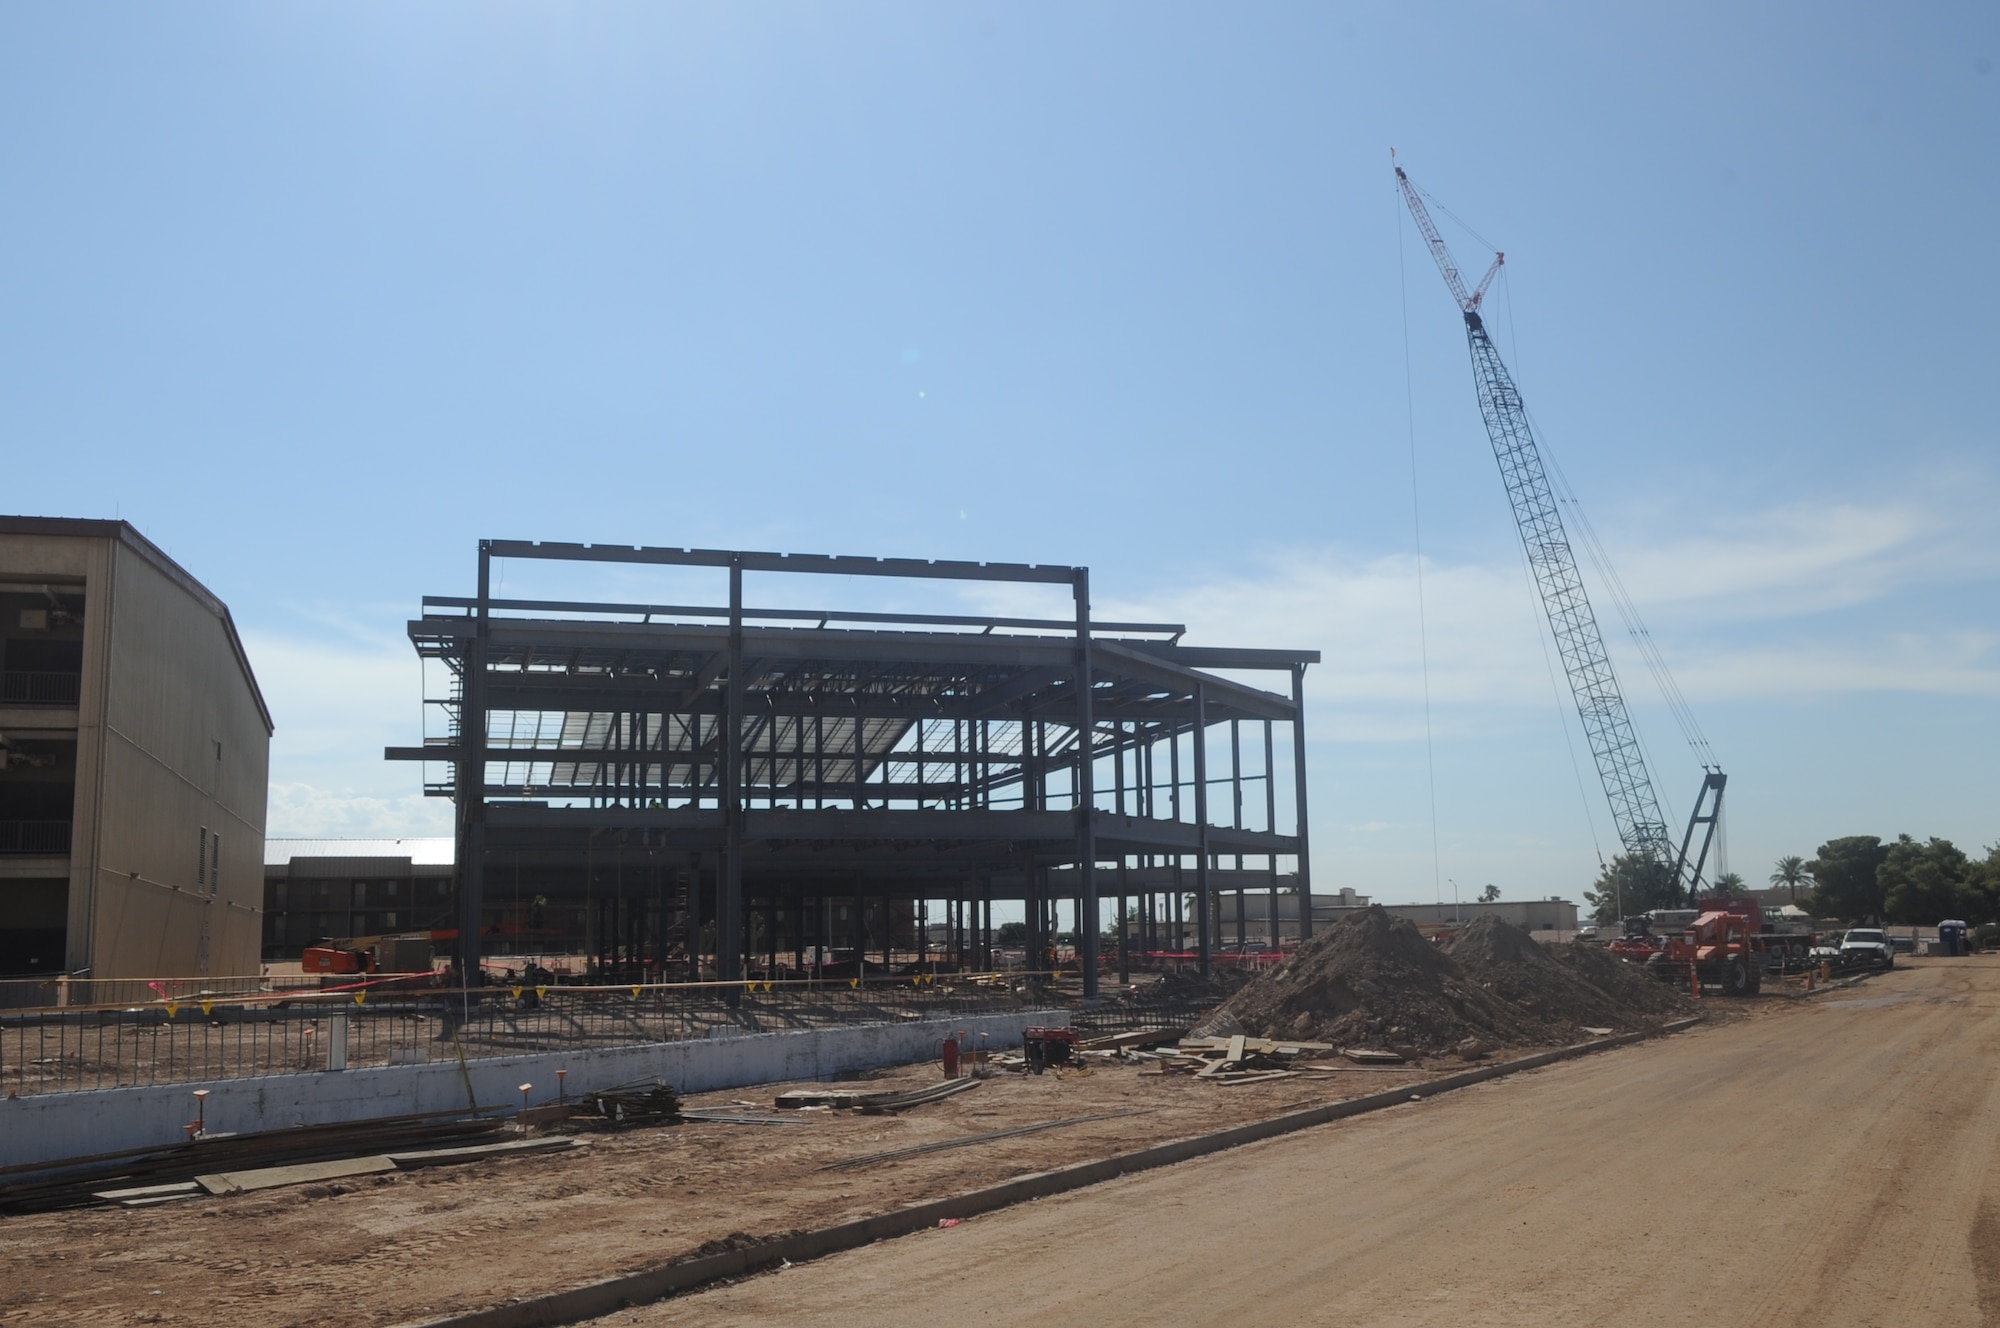 The new F-35 Academic Training Center is under construction at Luke. It is due to be completed at the beginning of 2014. (U.S. Air Force photo/Airman 1st Class Devante Williams)